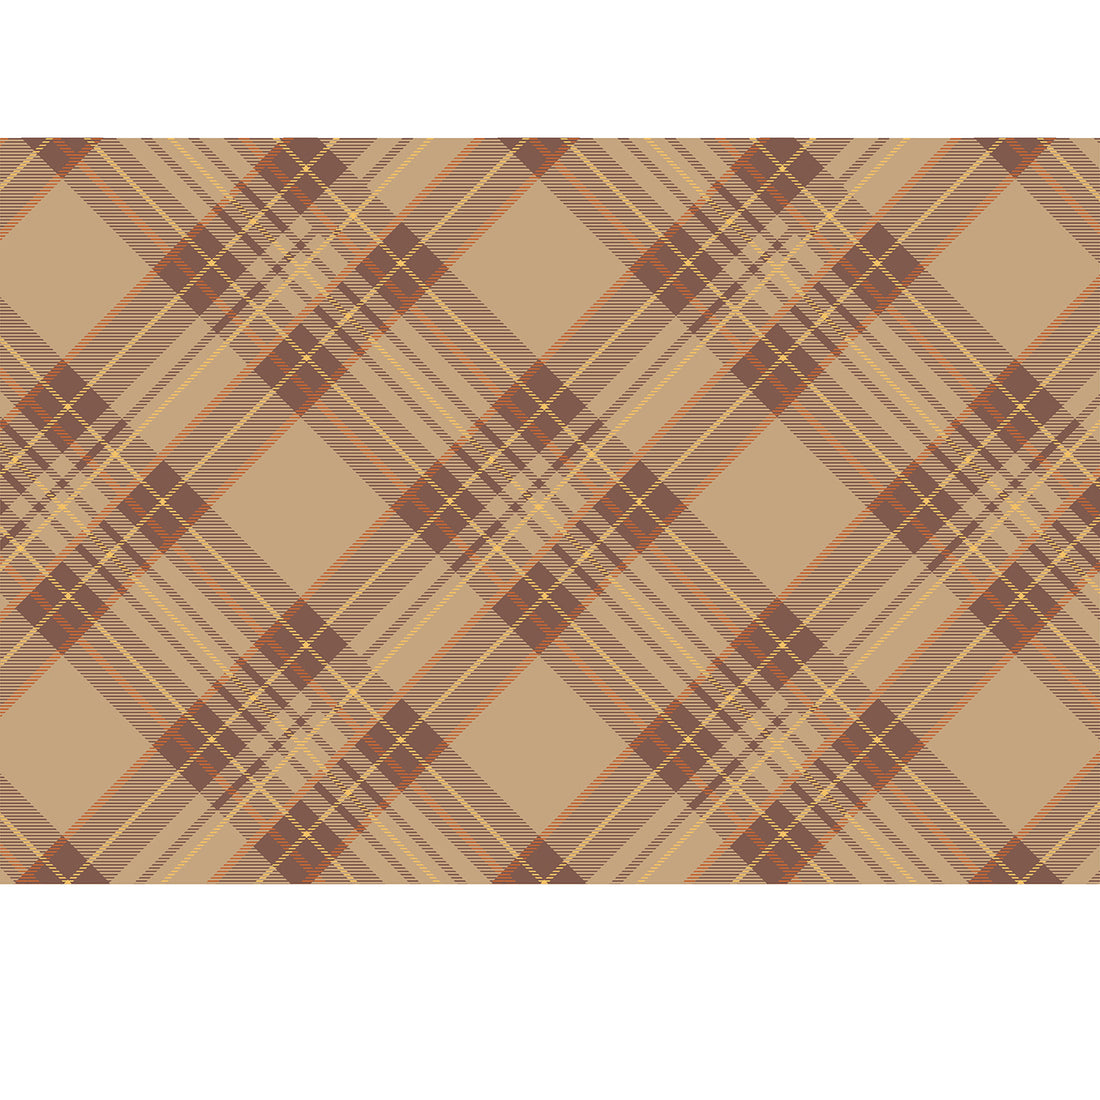 This Brown Autumn Plaid Placemat by Hester &amp; Cook is perfect for fall table settings